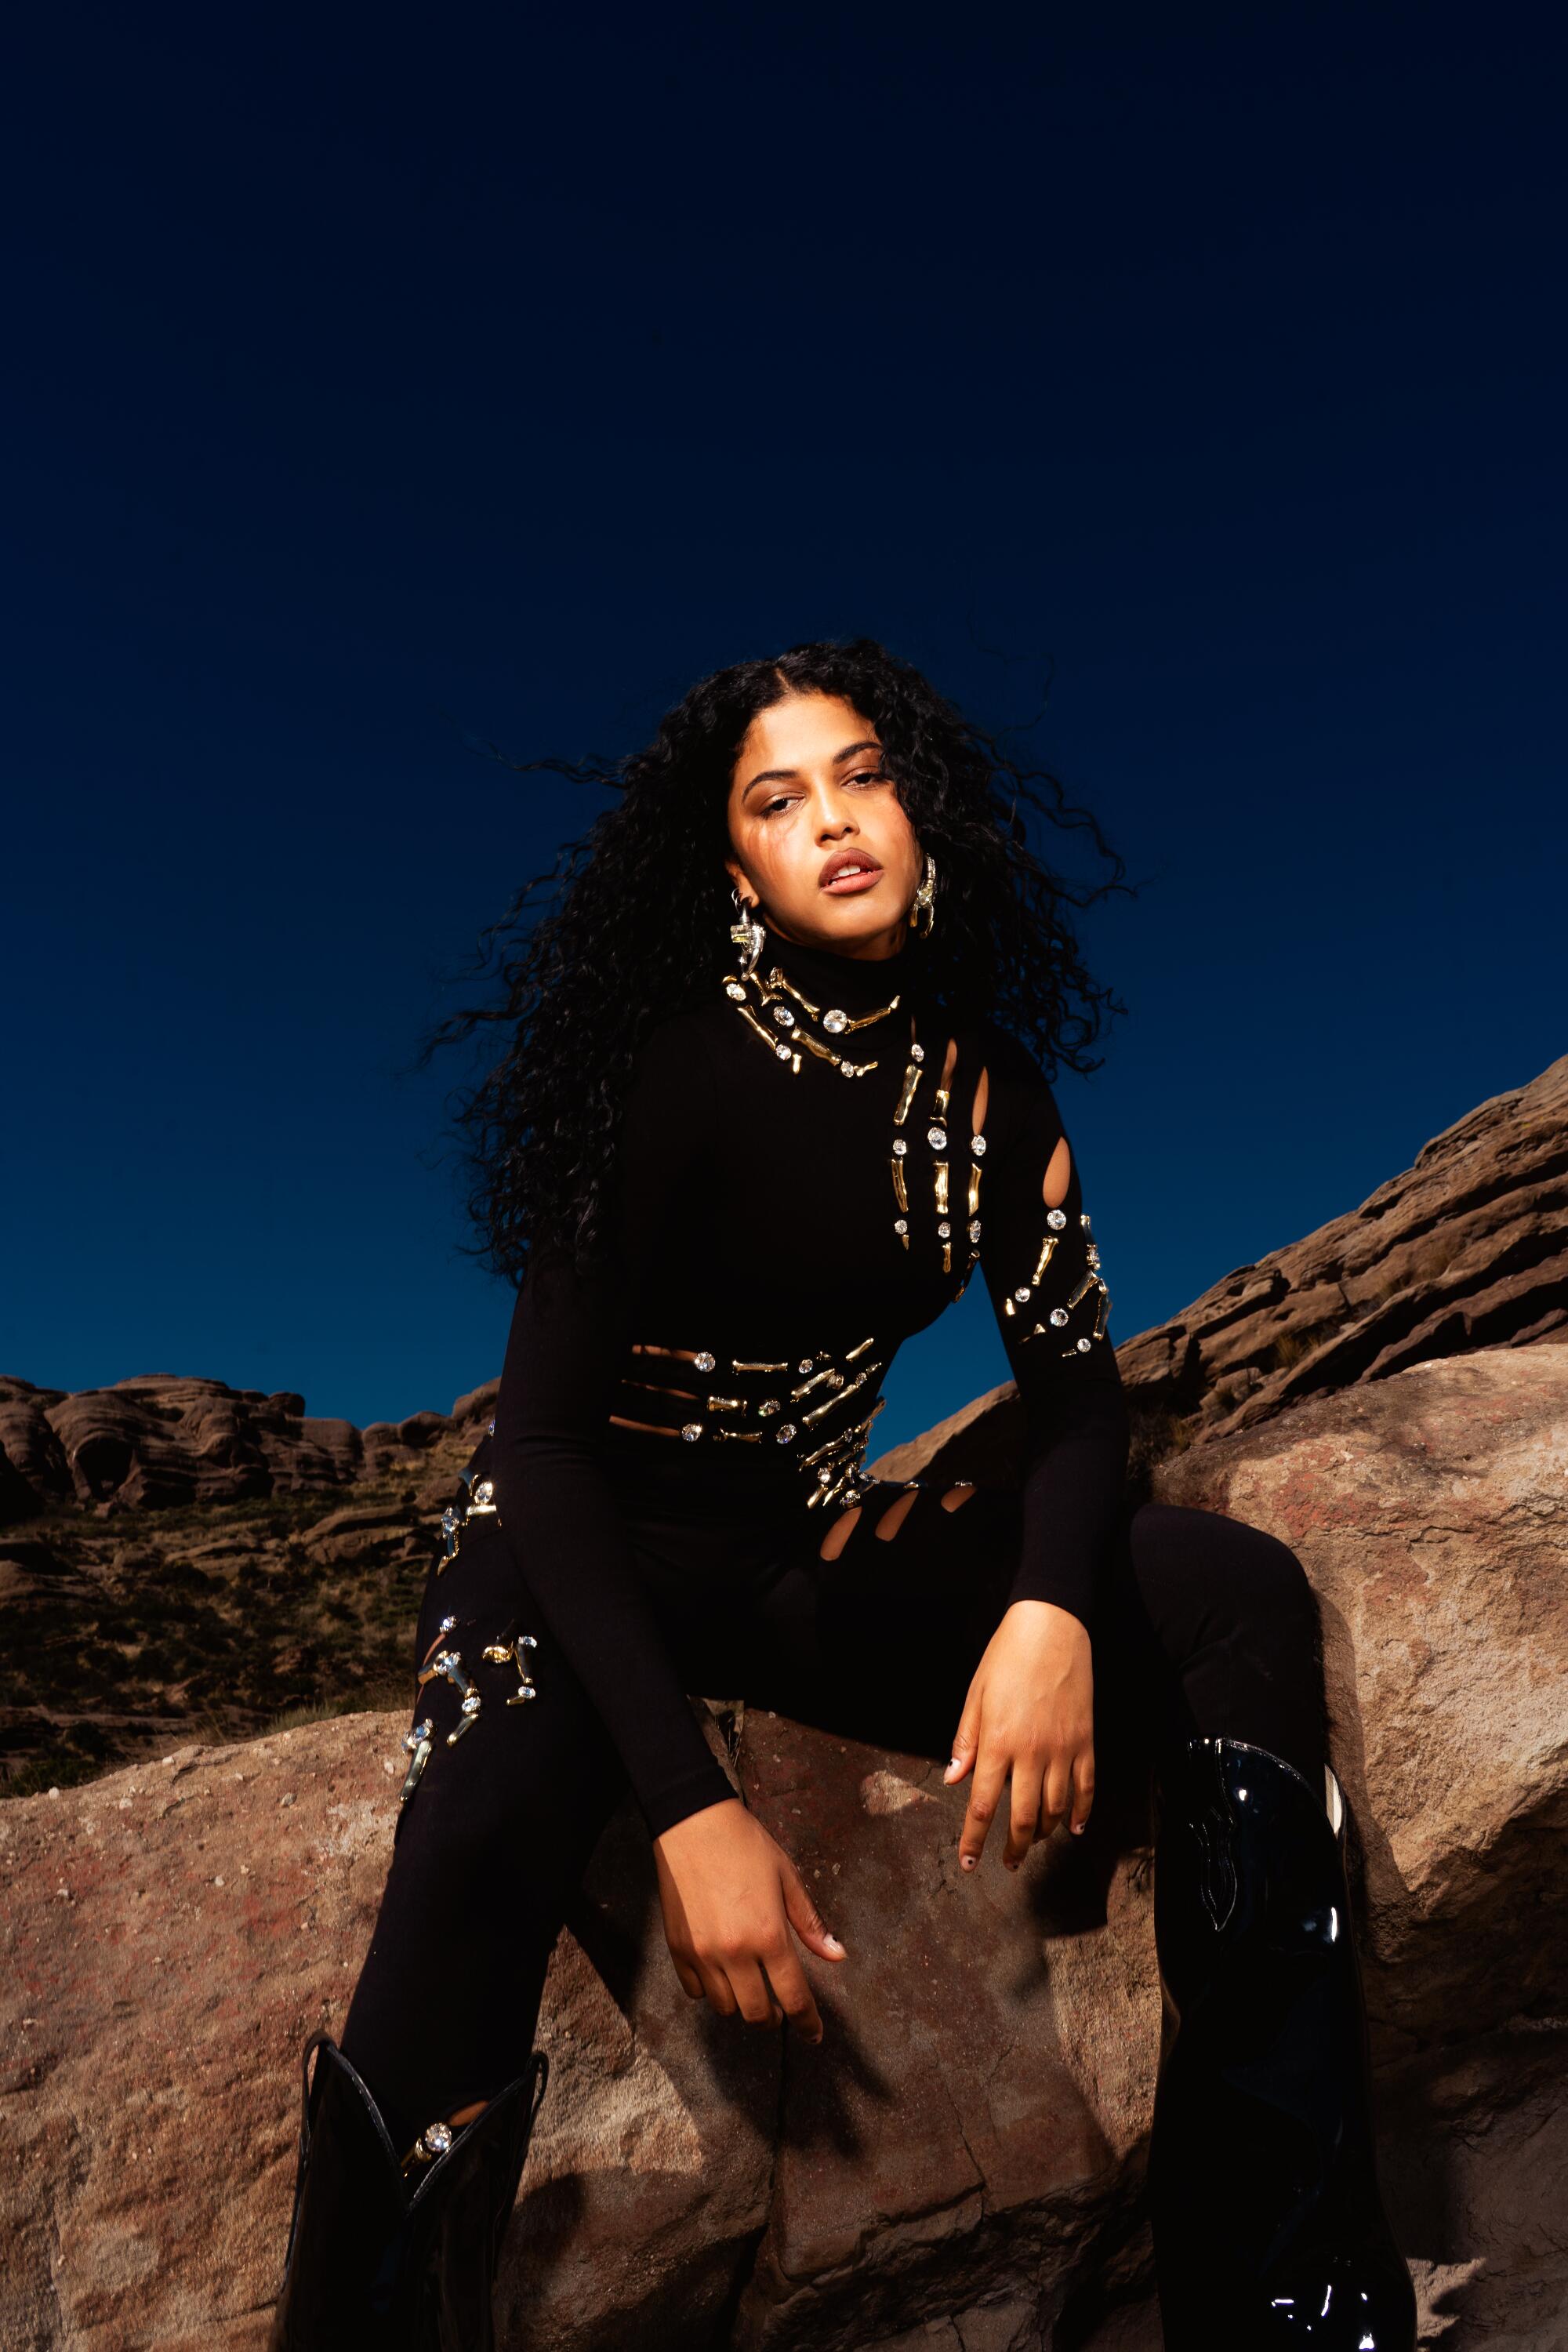 Artist Yendry sits on a rock in the desert in an all black outfit.